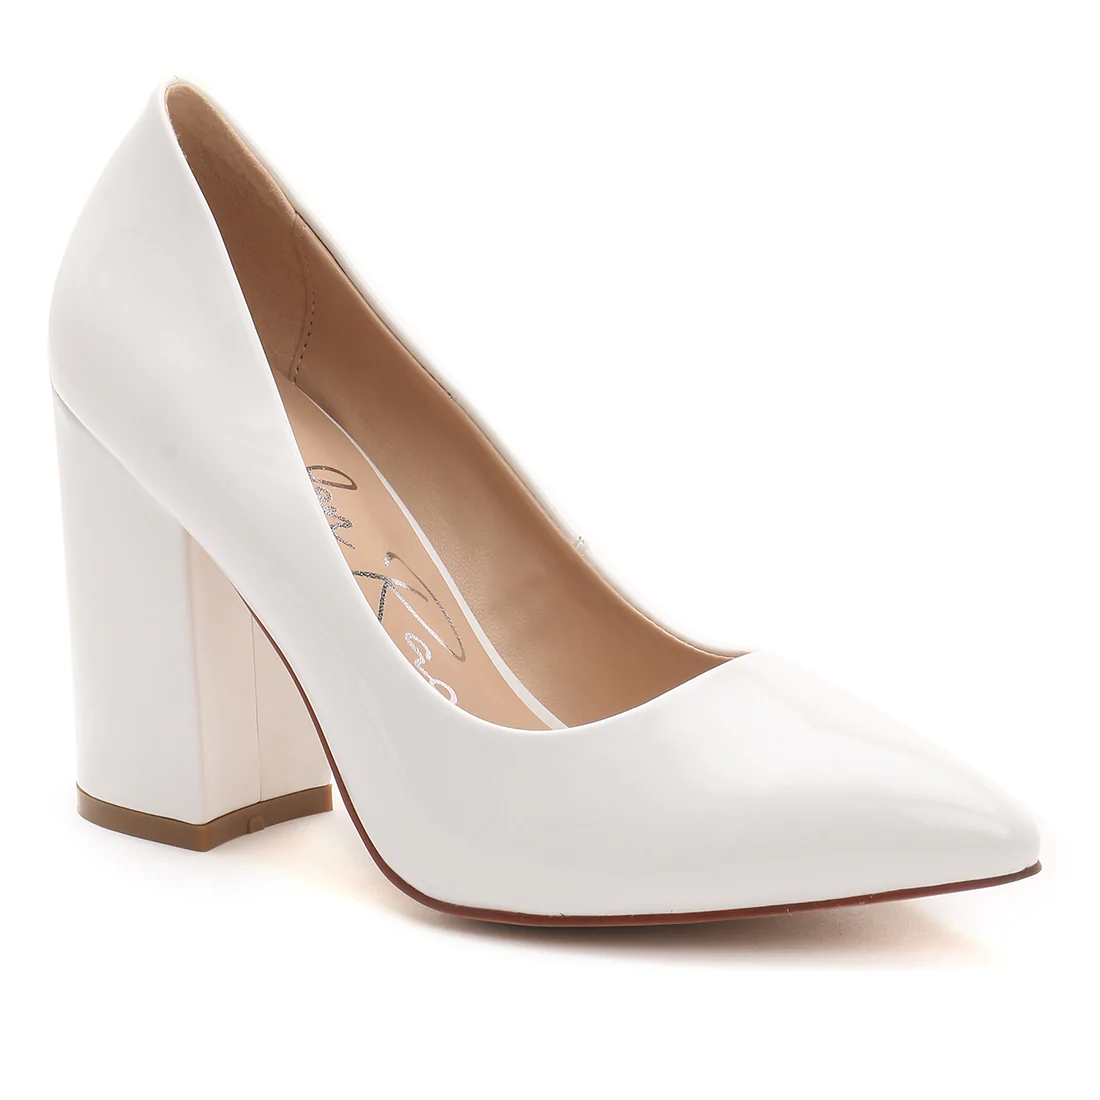 BLOCK HEELED FORMAL PUMPS IN WHITE